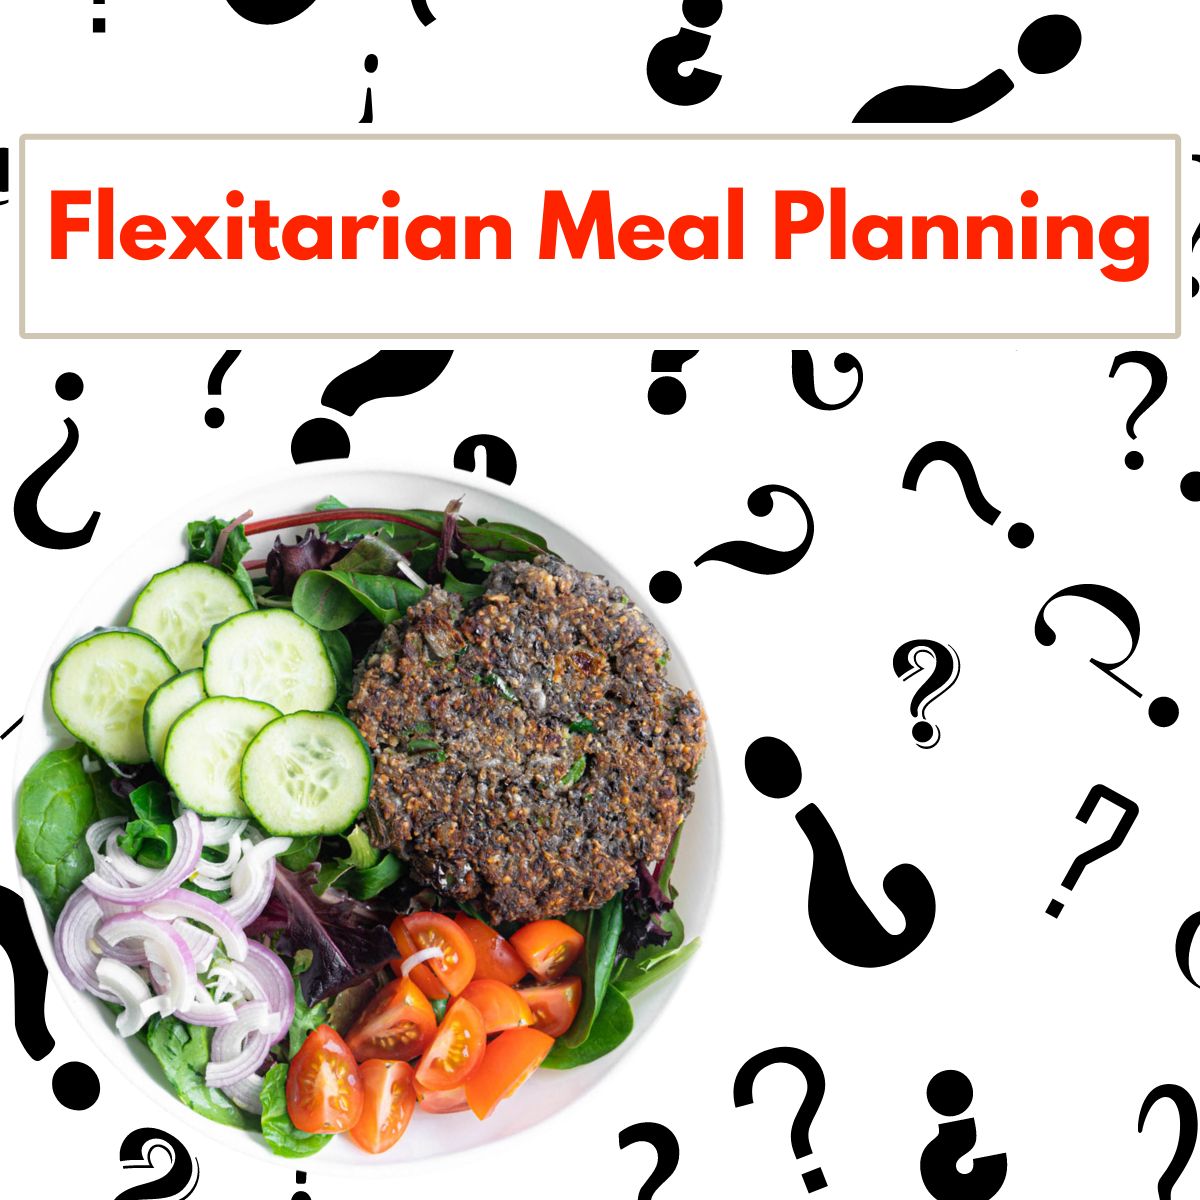 Text overlay "Flexitarian Meal Planning" with an image of a black bean burger salad and in the background are question marks